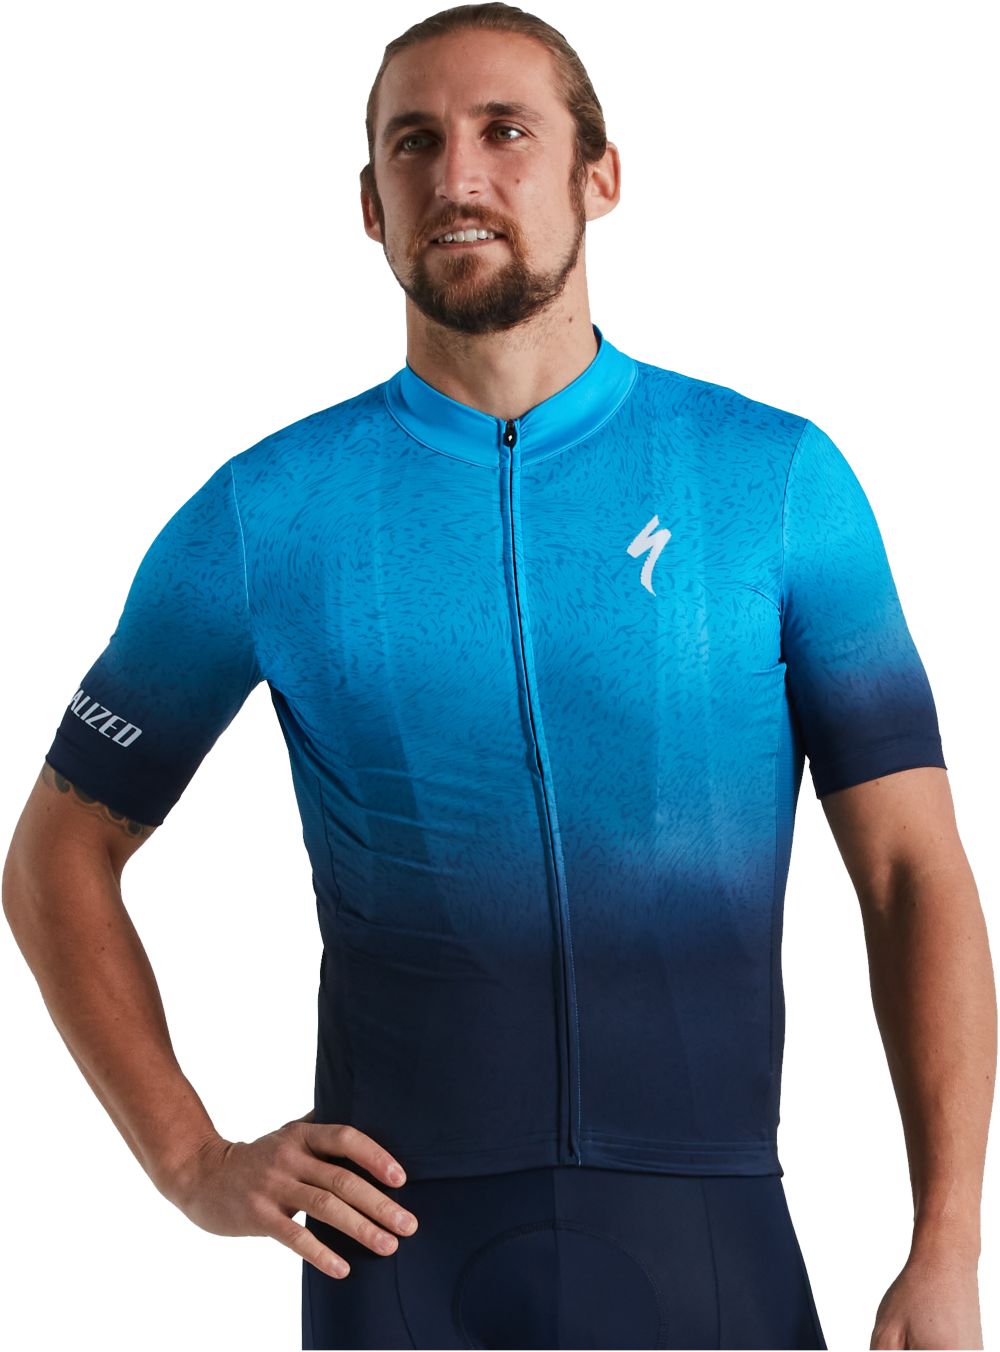 Specialized RBX Comp Jersey shortsleeve, navy-tobacco